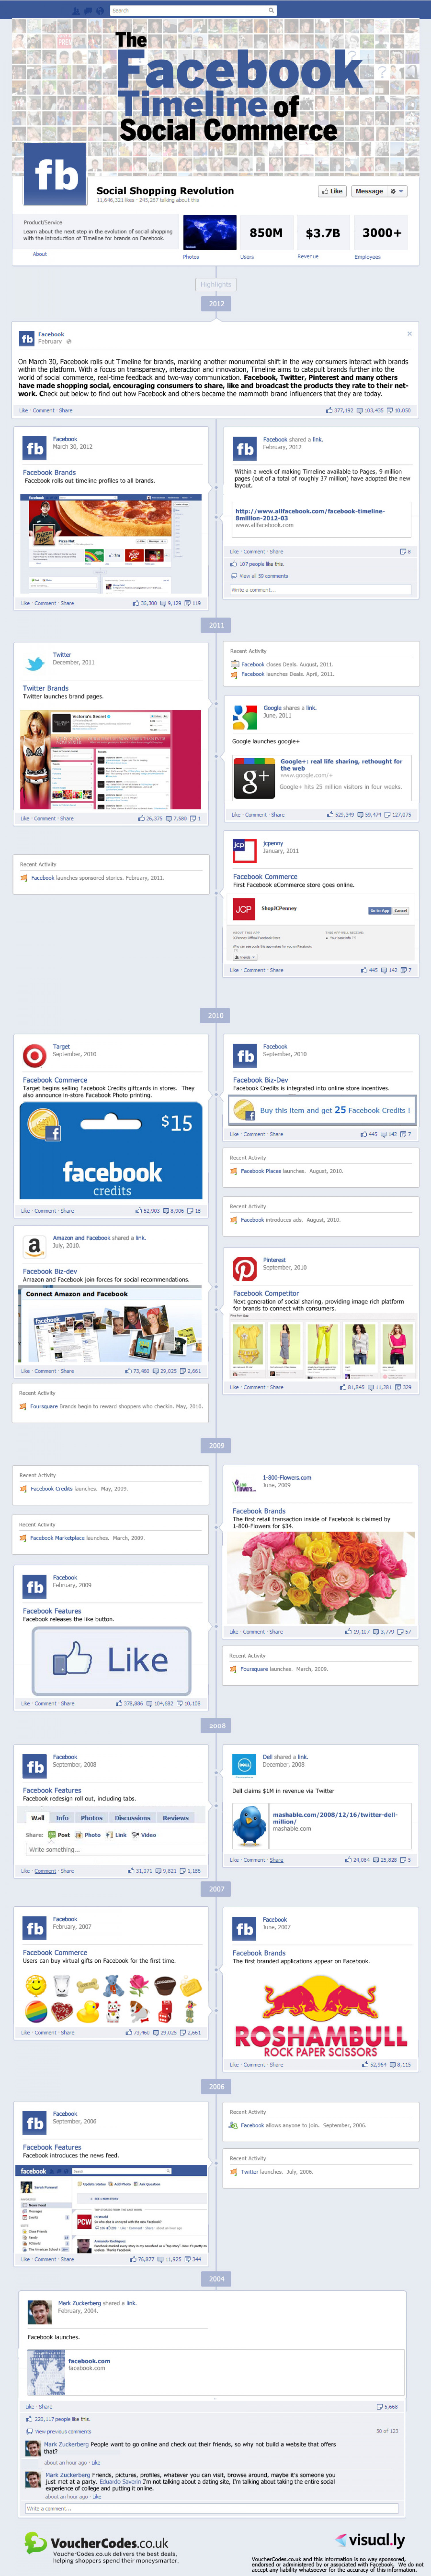 The Facebook Timeline of Social Commerce Infographic